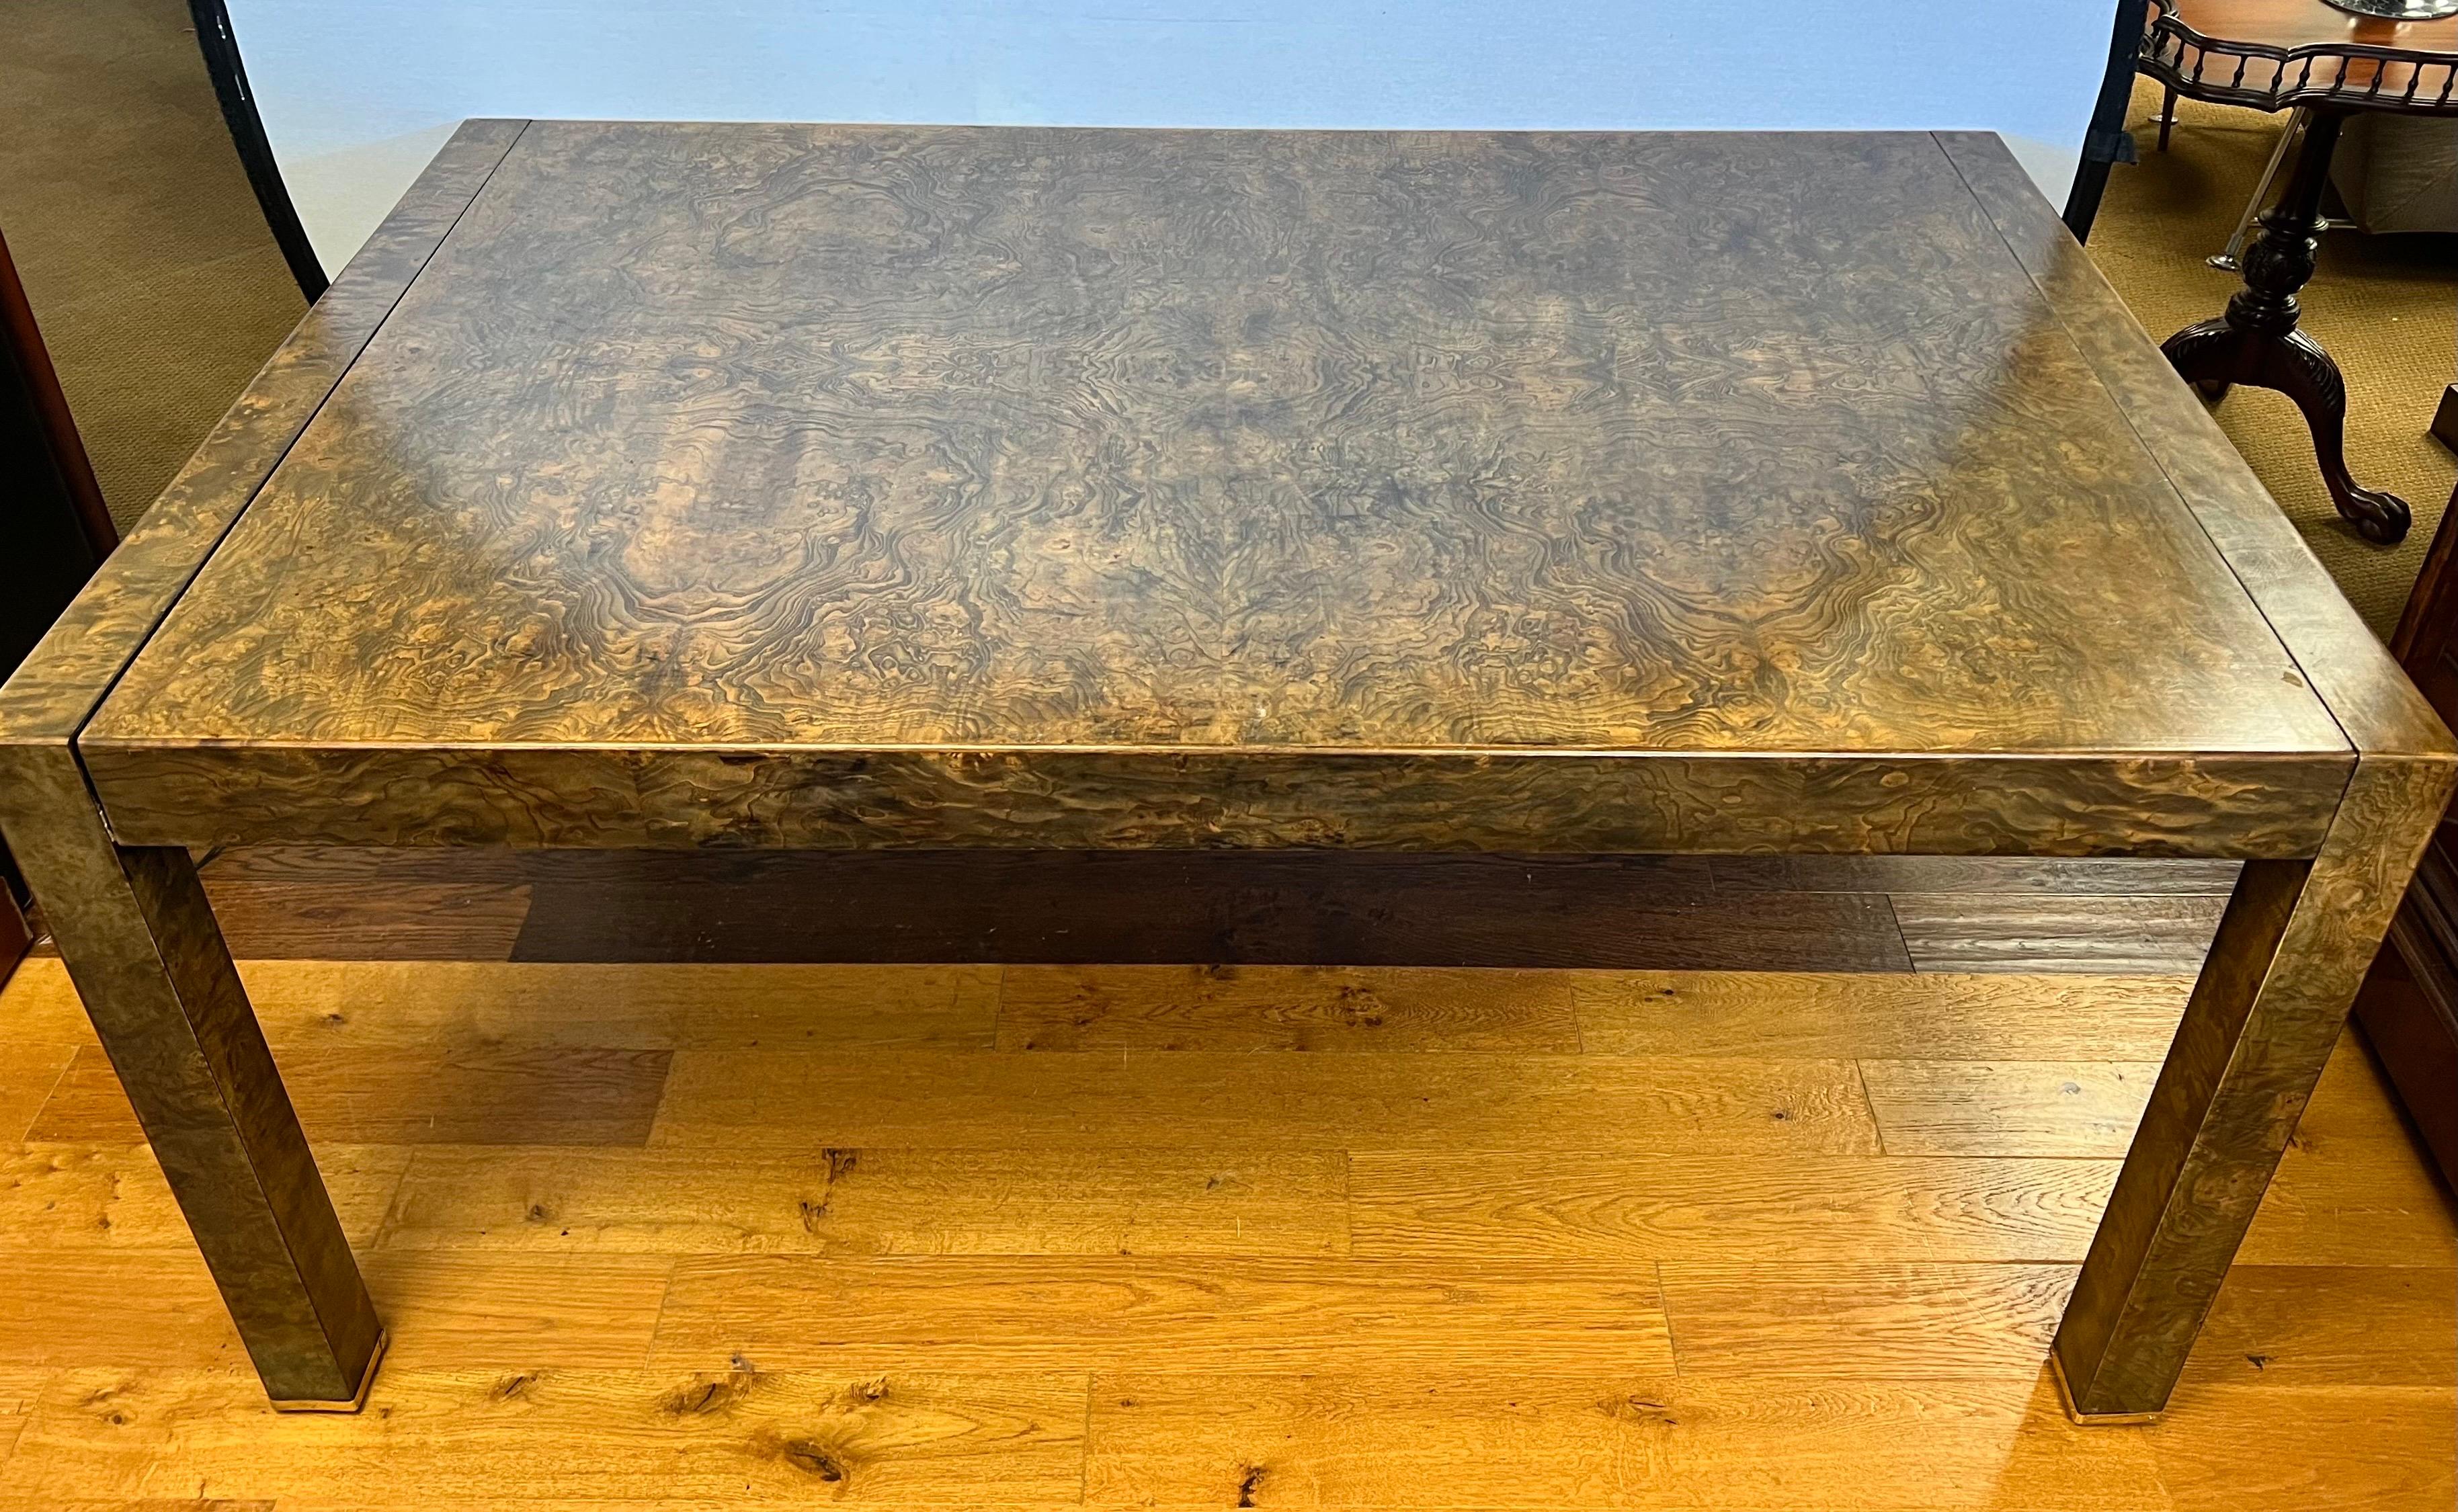 Impressive Mid-Century modern burled olive wood, expandable Parsons dining table. Beautiful burl laminate veneer wraps around the entire table top and legs with intricate burl detail and smooth clean lines characteristic of classic mid century